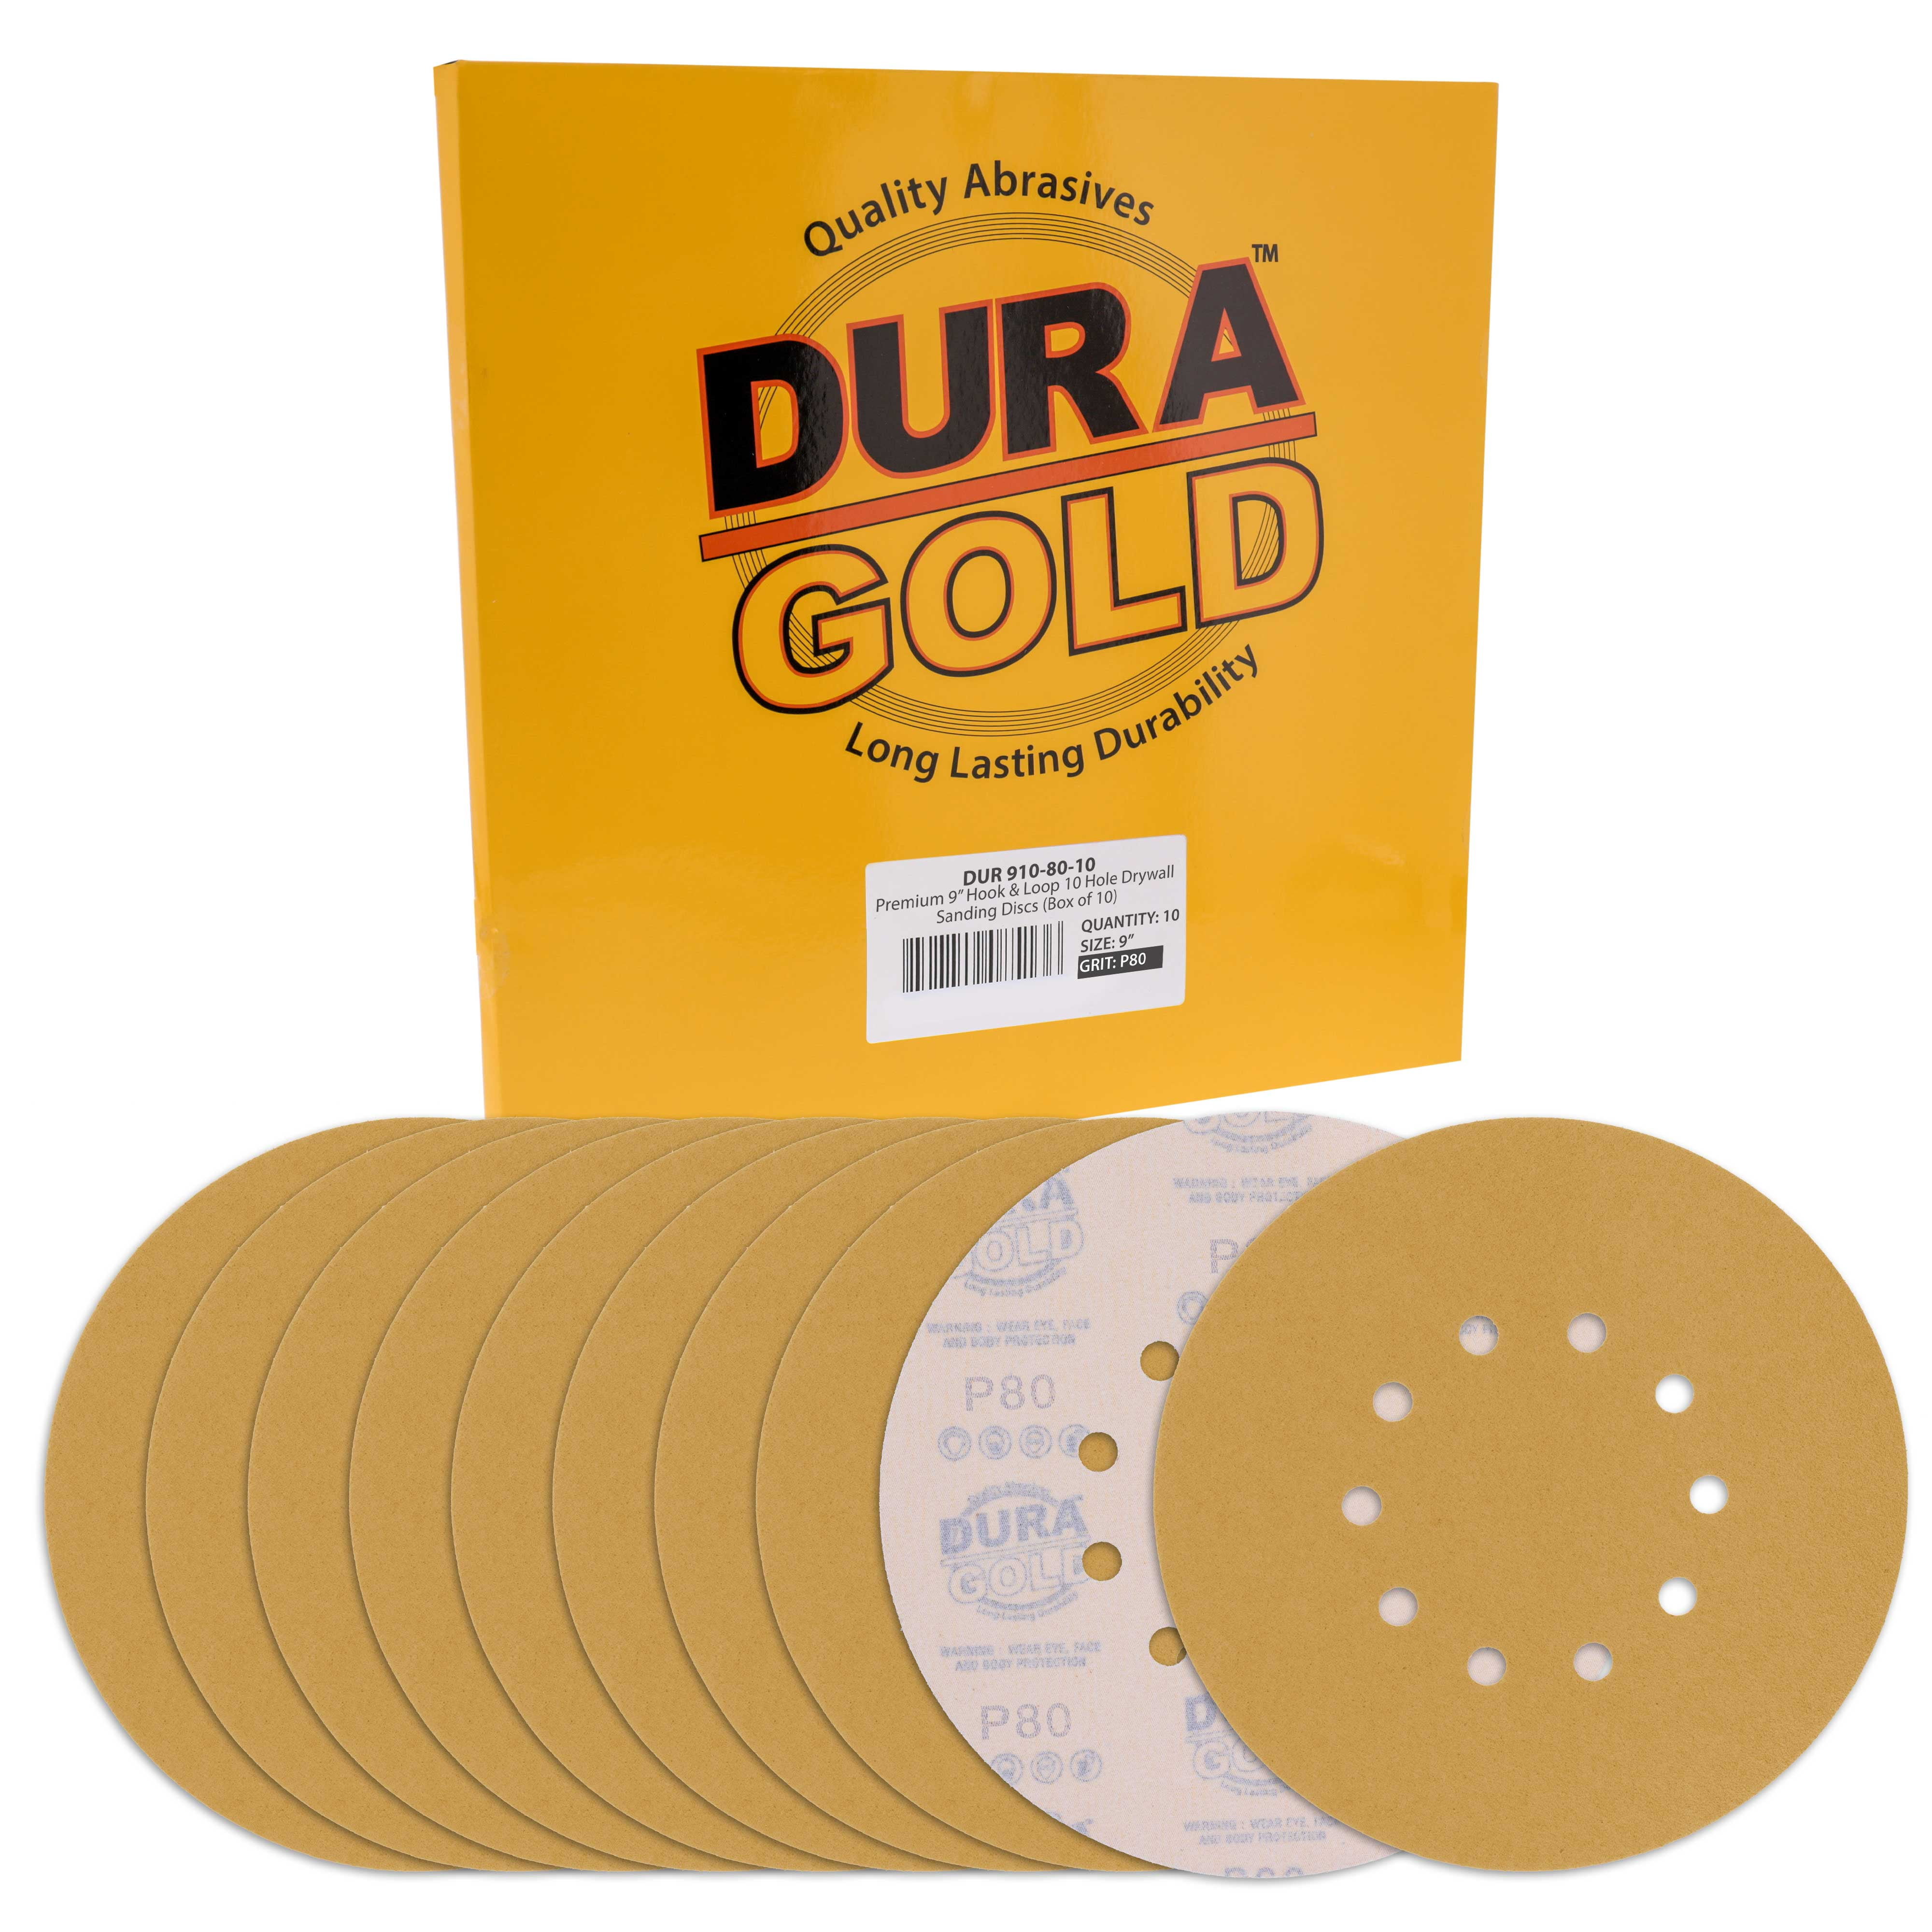 Box of 10 Sand Wood Dura-Gold Premium 9 Drywall Sanding Discs 80 Grit For Drywall Power Sander Fast Cutting Aluminum Oxide Abrasive - 8 Hole Pattern Sandpaper Discs with Hook & Loop Backing 